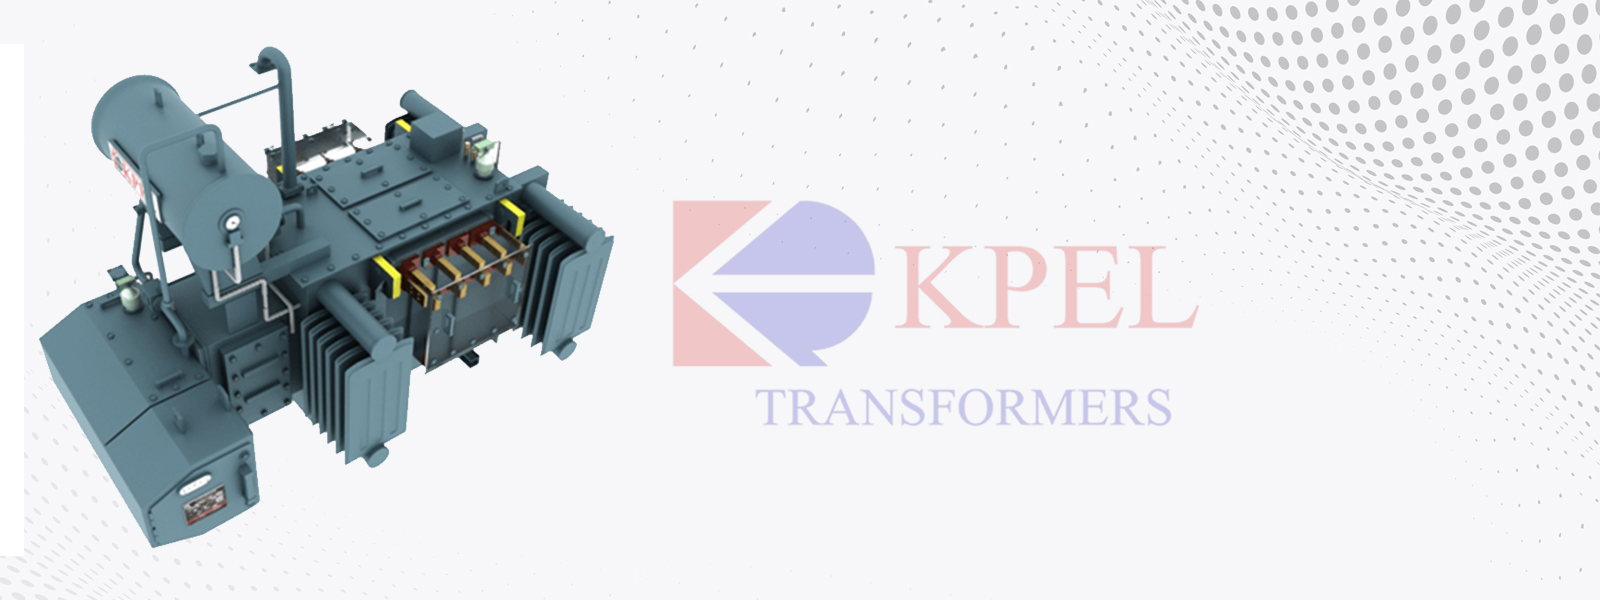 Top Power Transformers Manufacturing Company in India